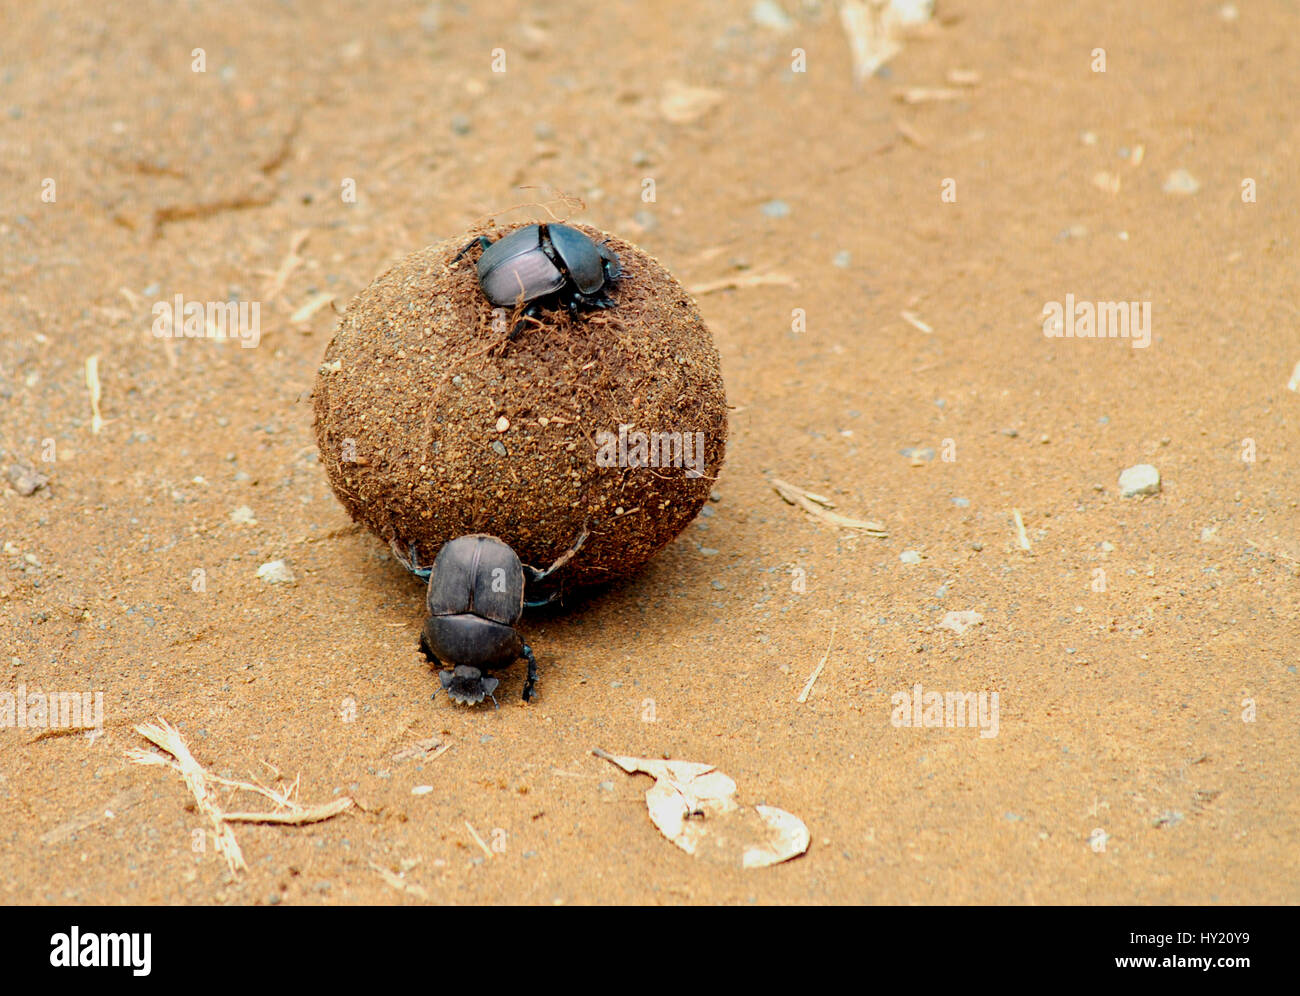 Image of Dung Beetles Rolling Elephant Dung at Addo National Park, South Africa. Stock Photo